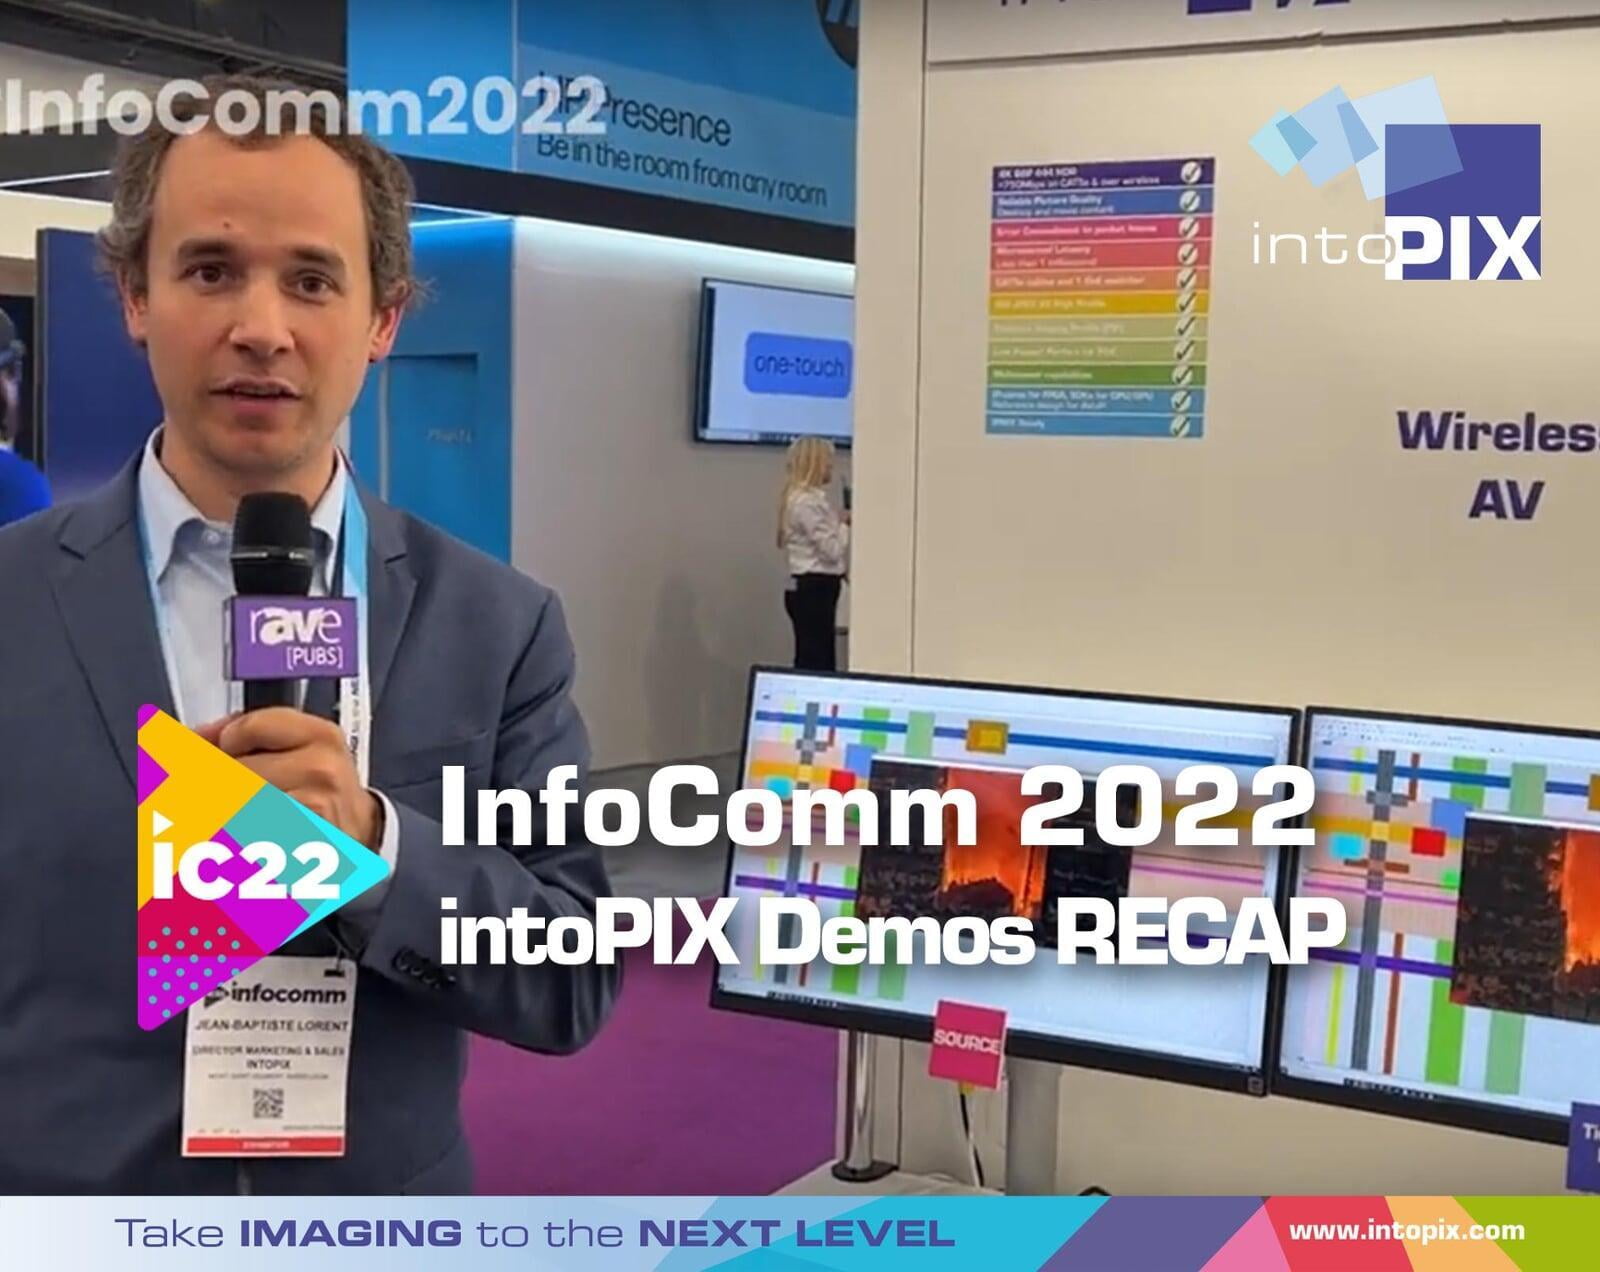 The recap of what intoPIX presented and awarded at Infocomm 2022!